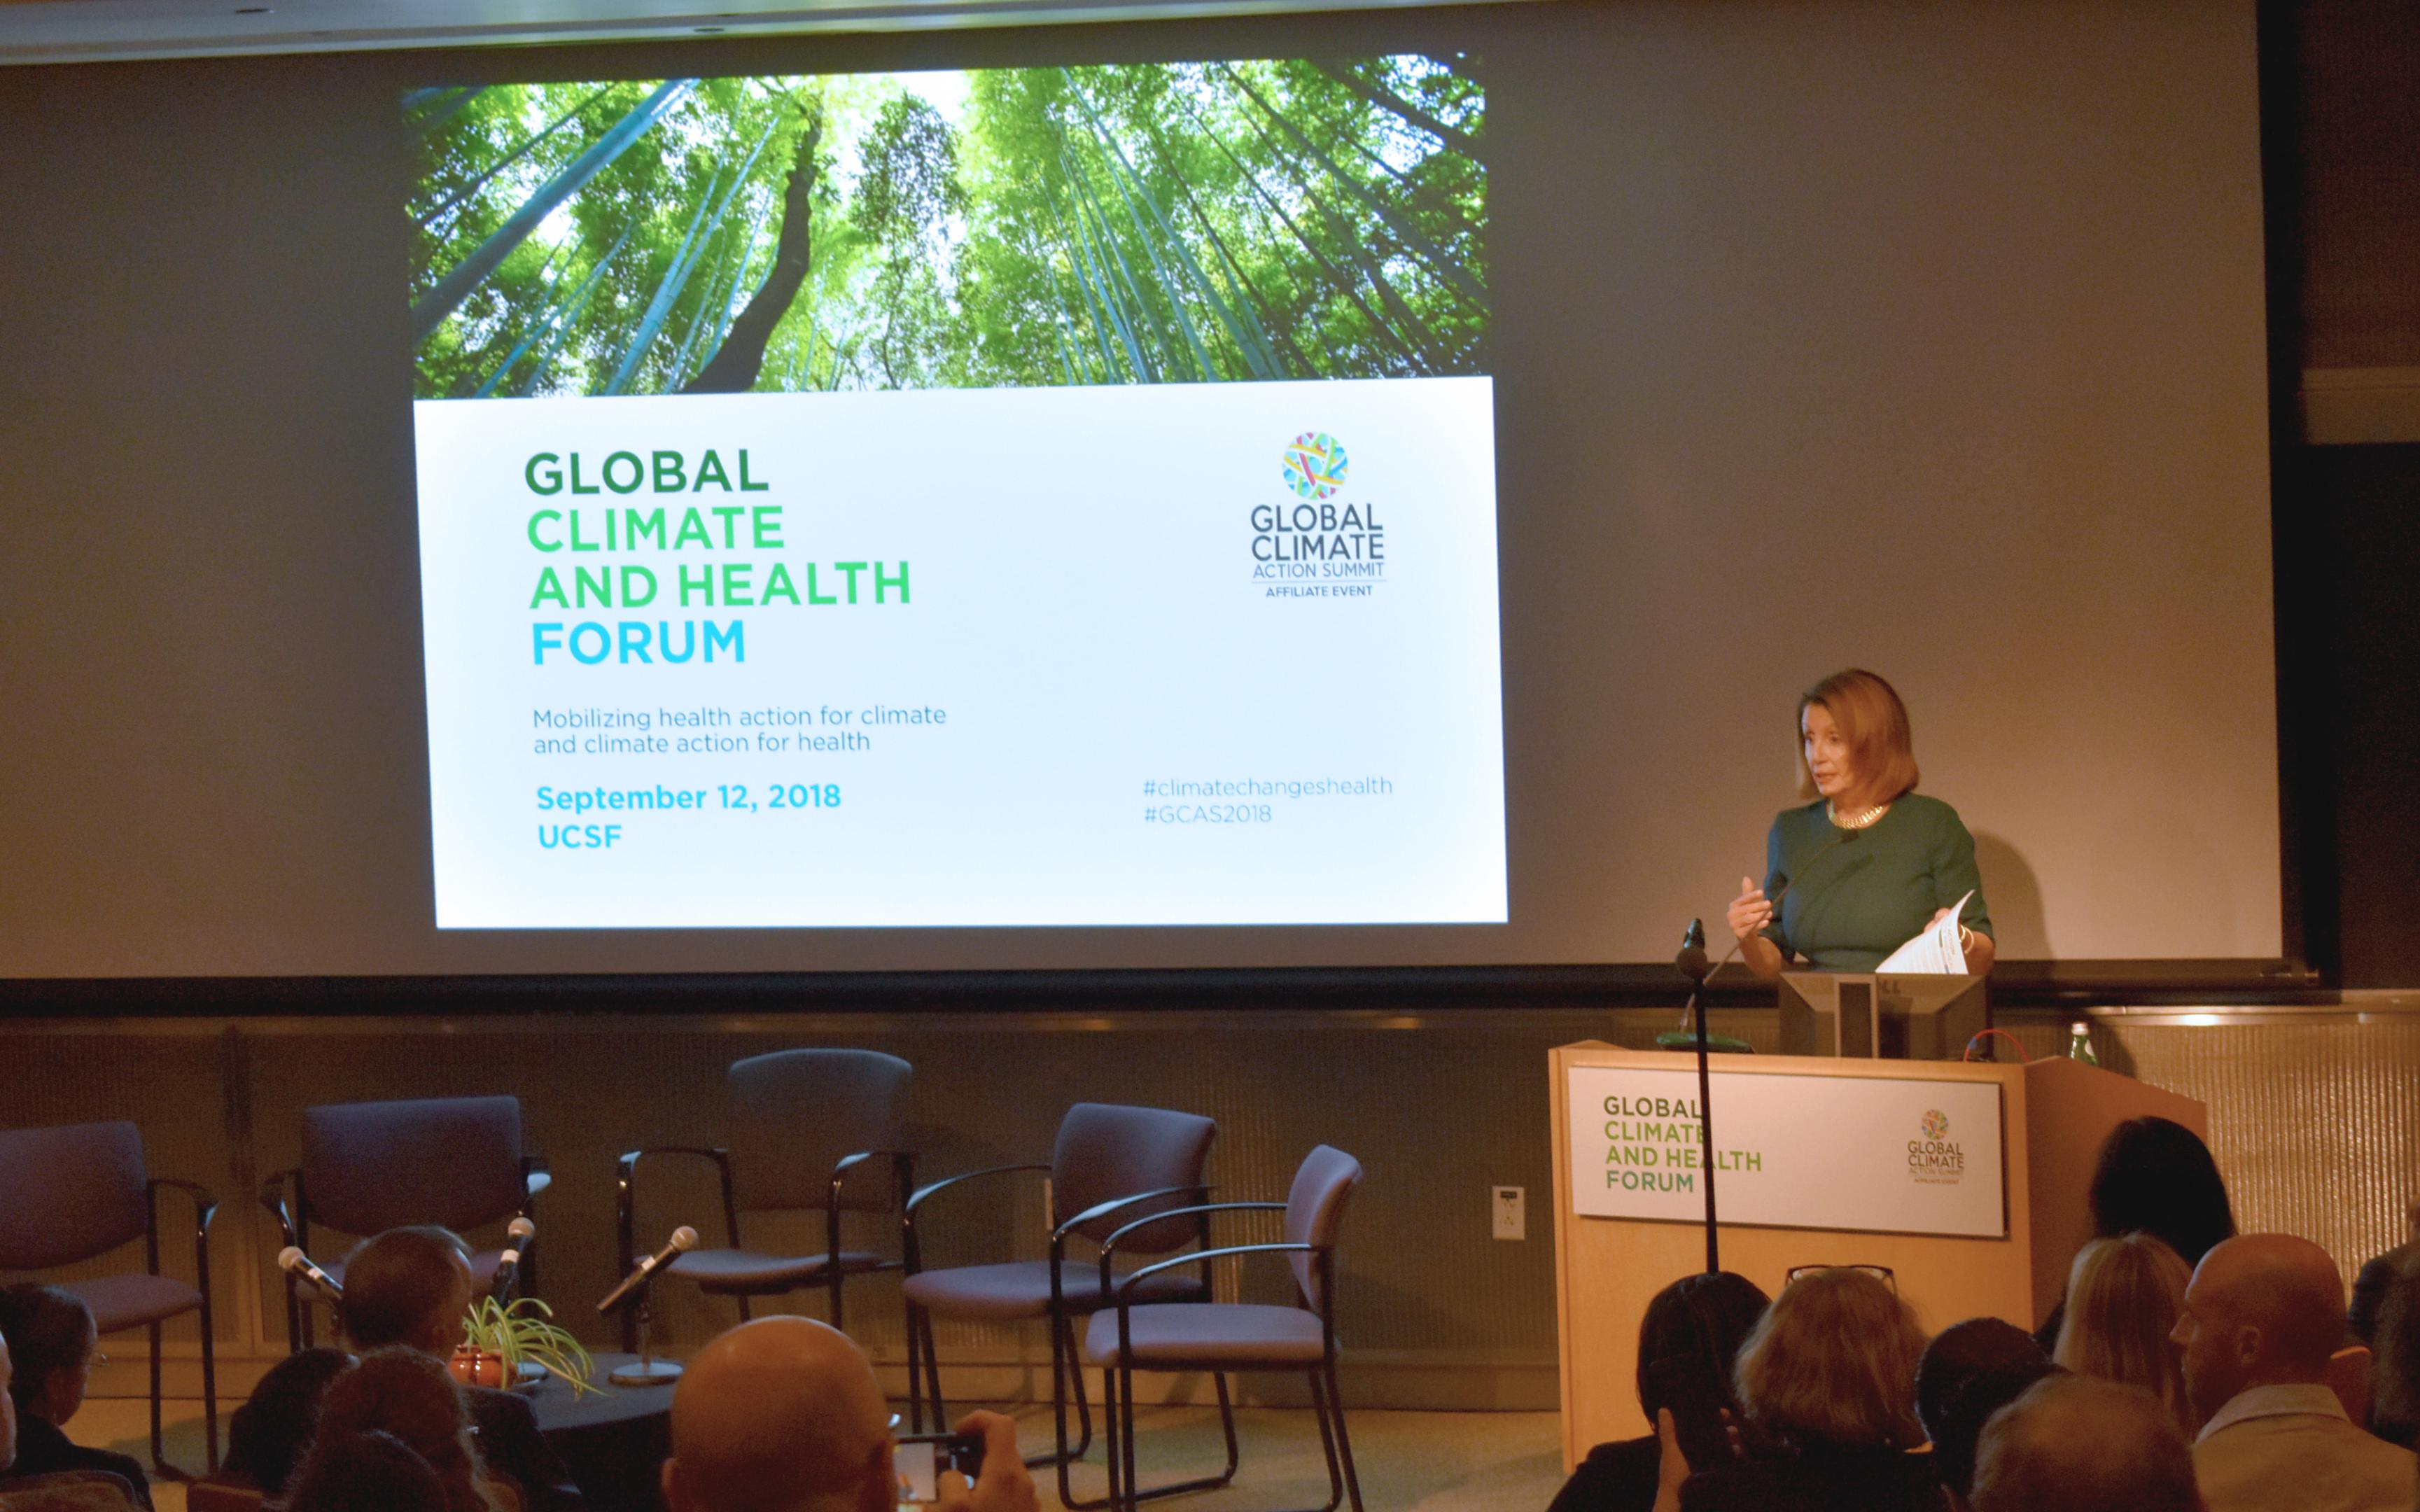 Nancy Pelosi, Democratic leader of the US House of Representatives at the Global Climate and Health Forum